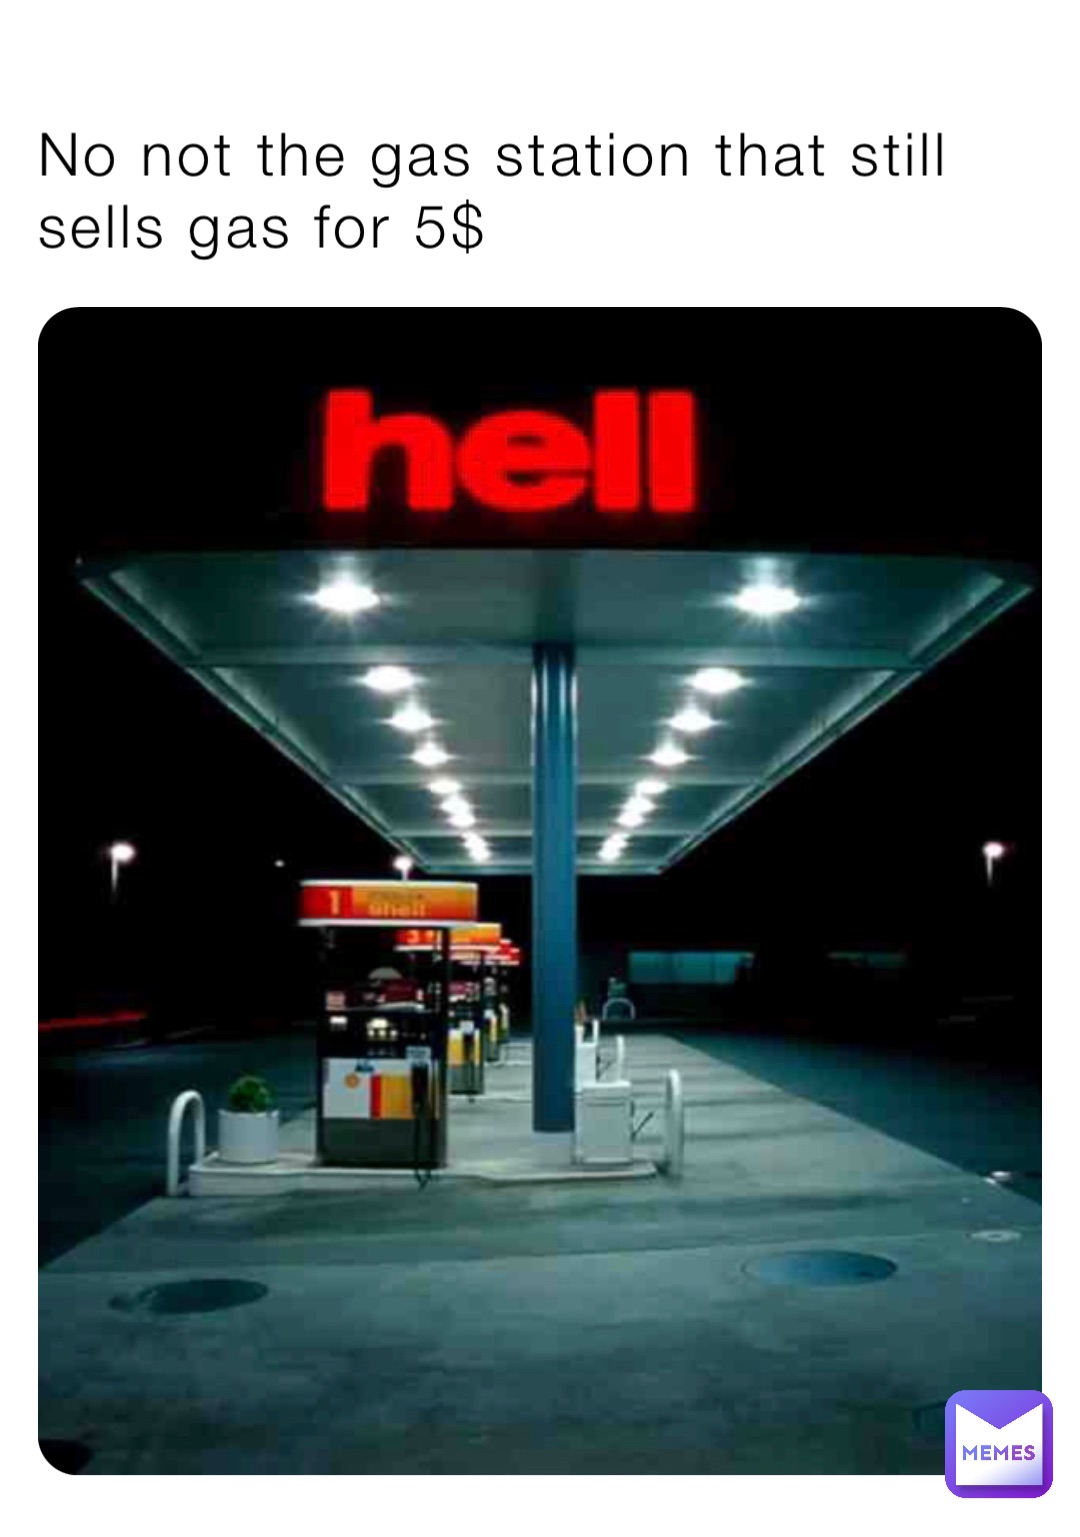 No not the gas station that still sells gas for 5$